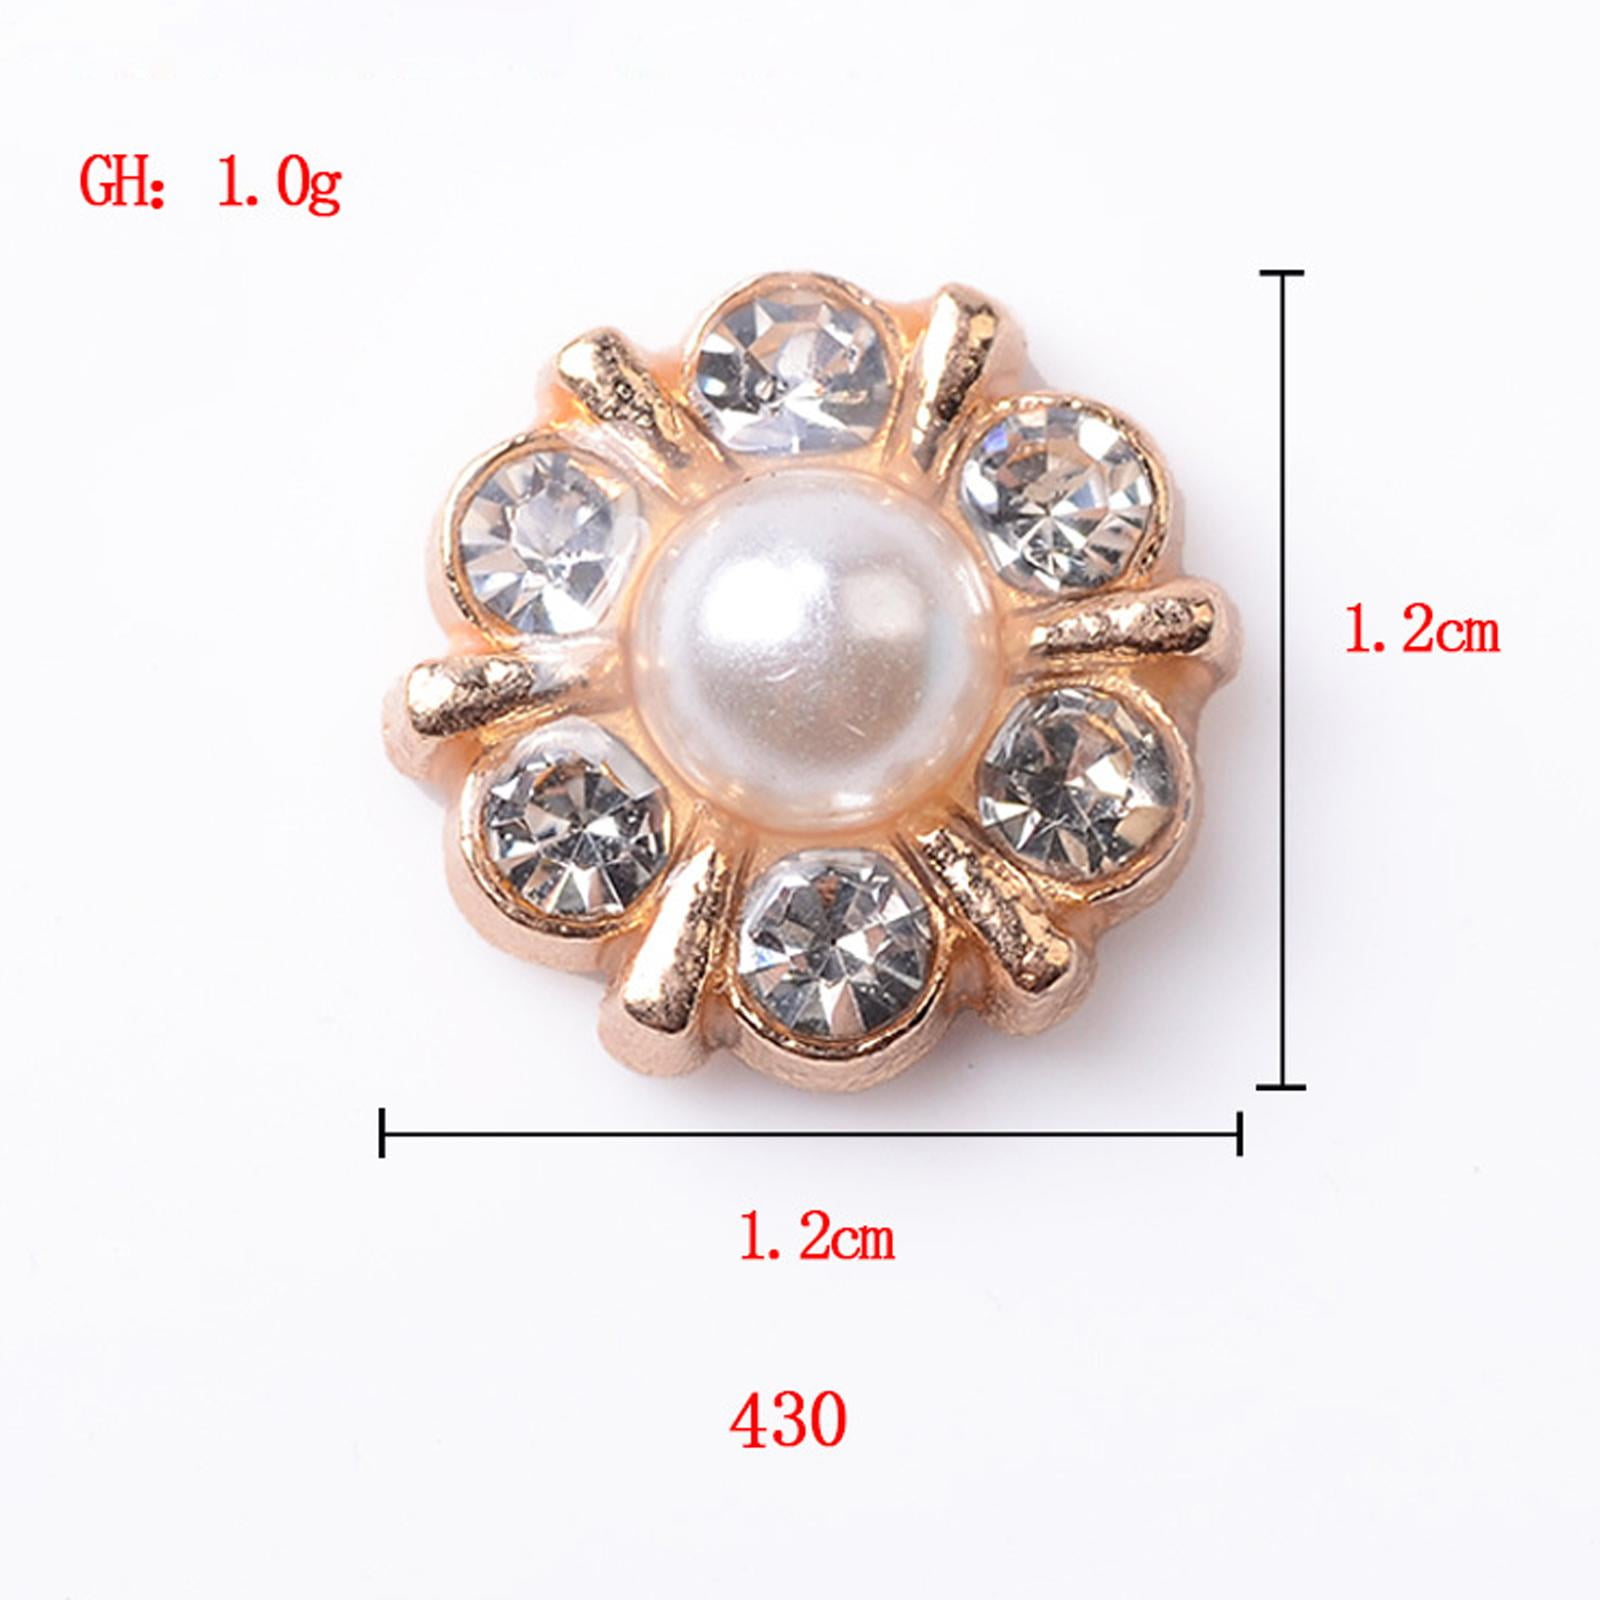  YWNYT 500PCS 12mm Flower Buttons with Rhinestones Sunflower Sew  on Embellishments Flatback Rhinestone Buttons Jewelry Flower Crystal  Accessory for Clothes, Earring and DIY Crafts Wedding Decoration